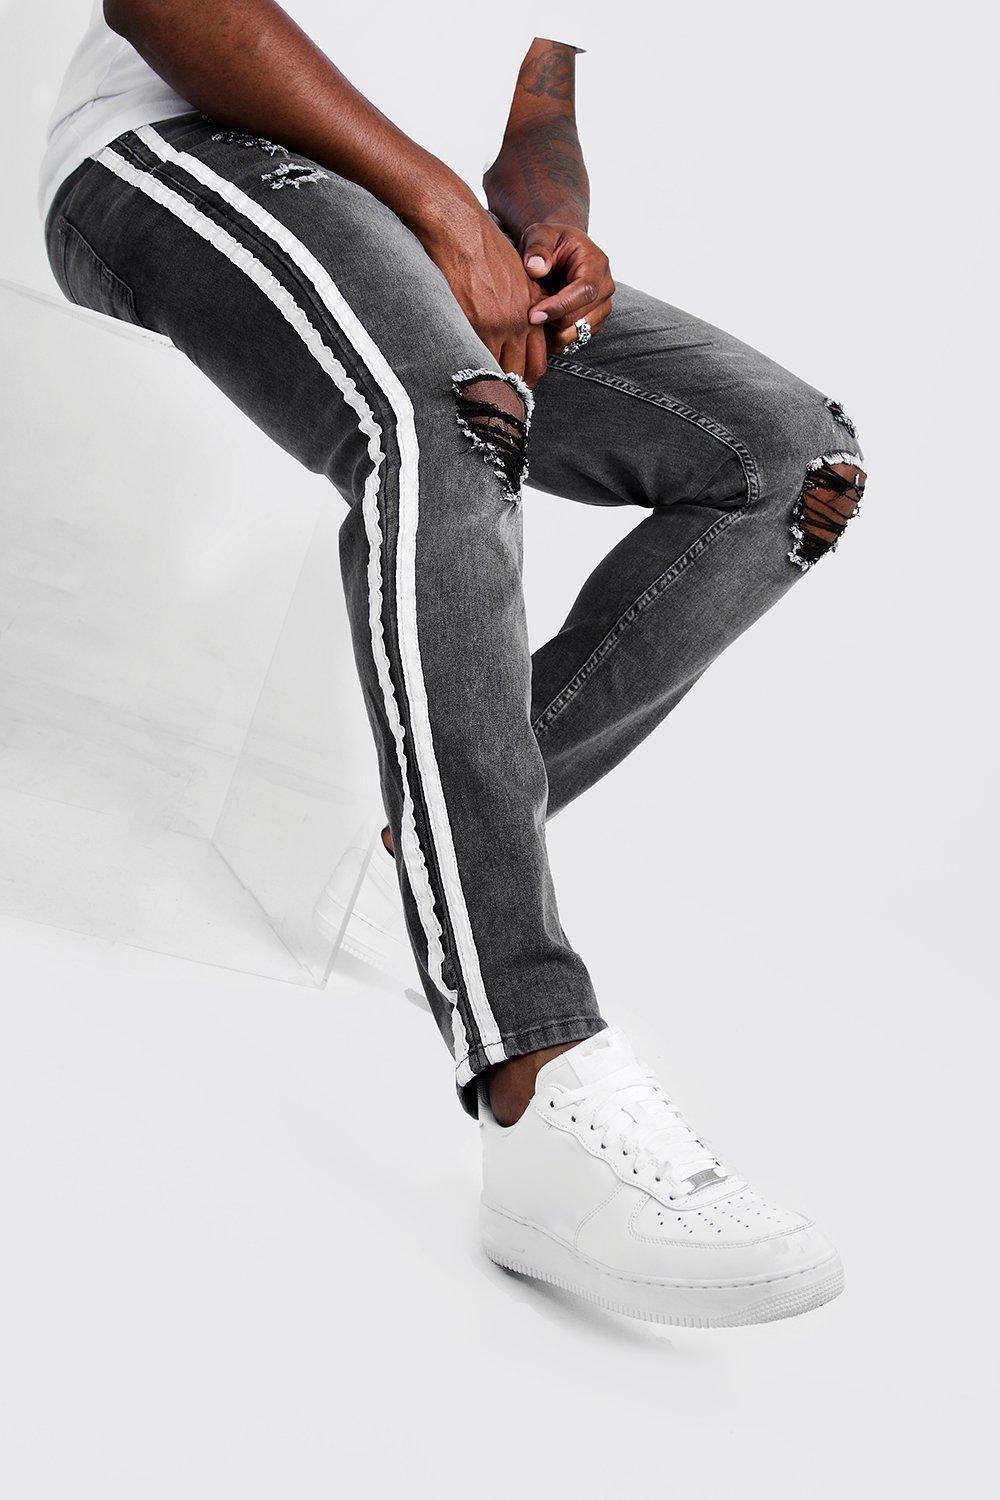 white ripped jeans mens big and tall